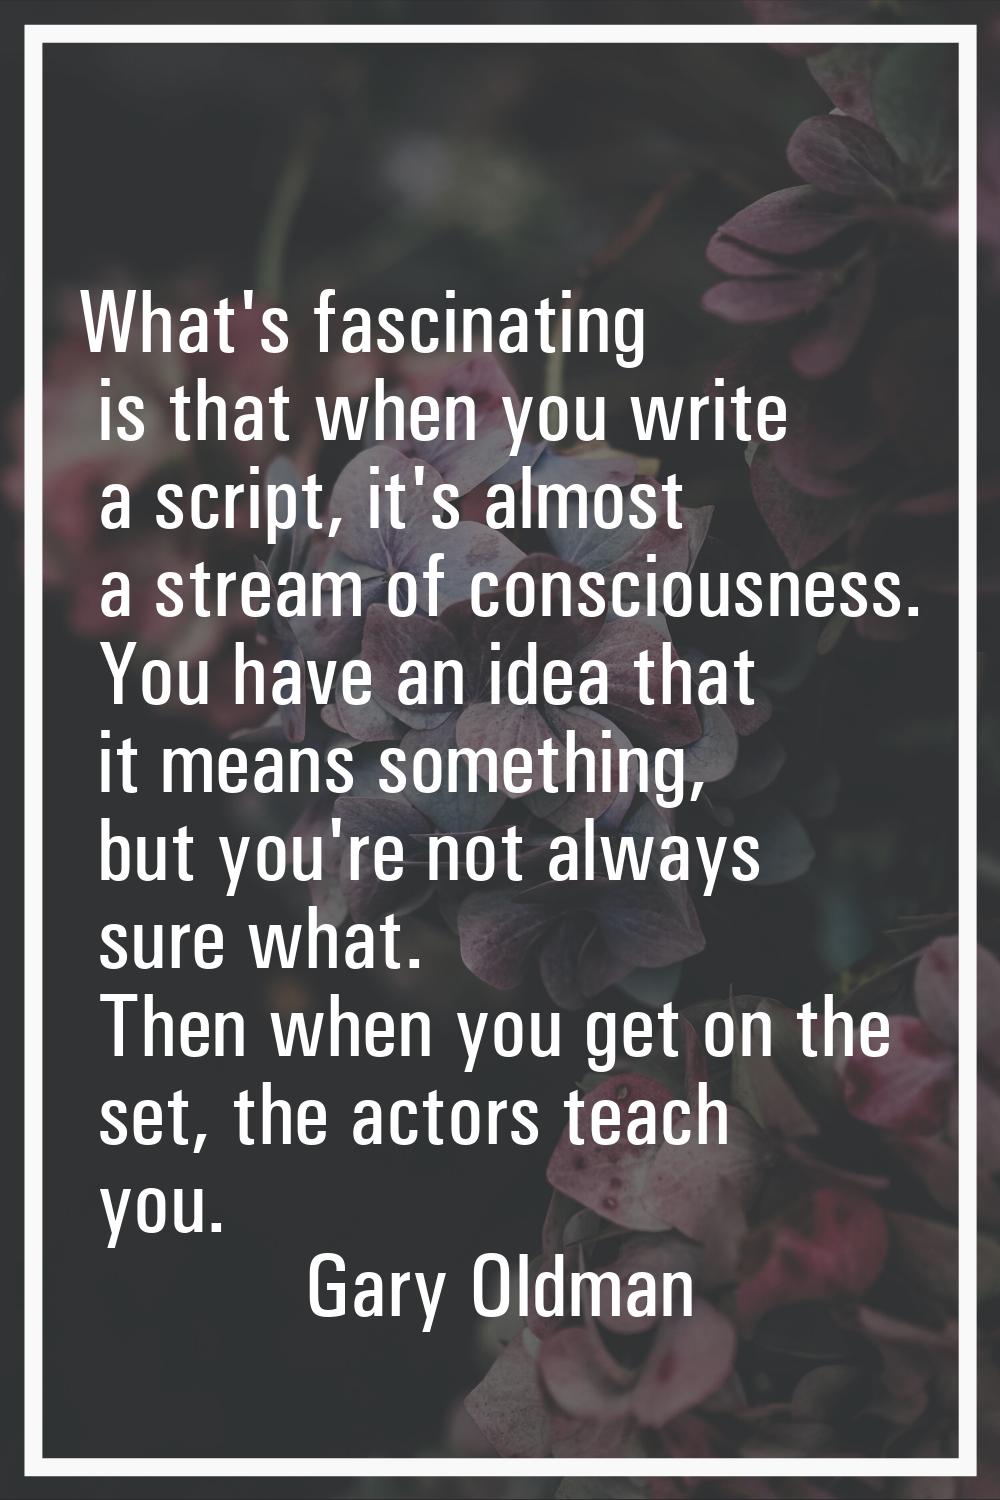 What's fascinating is that when you write a script, it's almost a stream of consciousness. You have